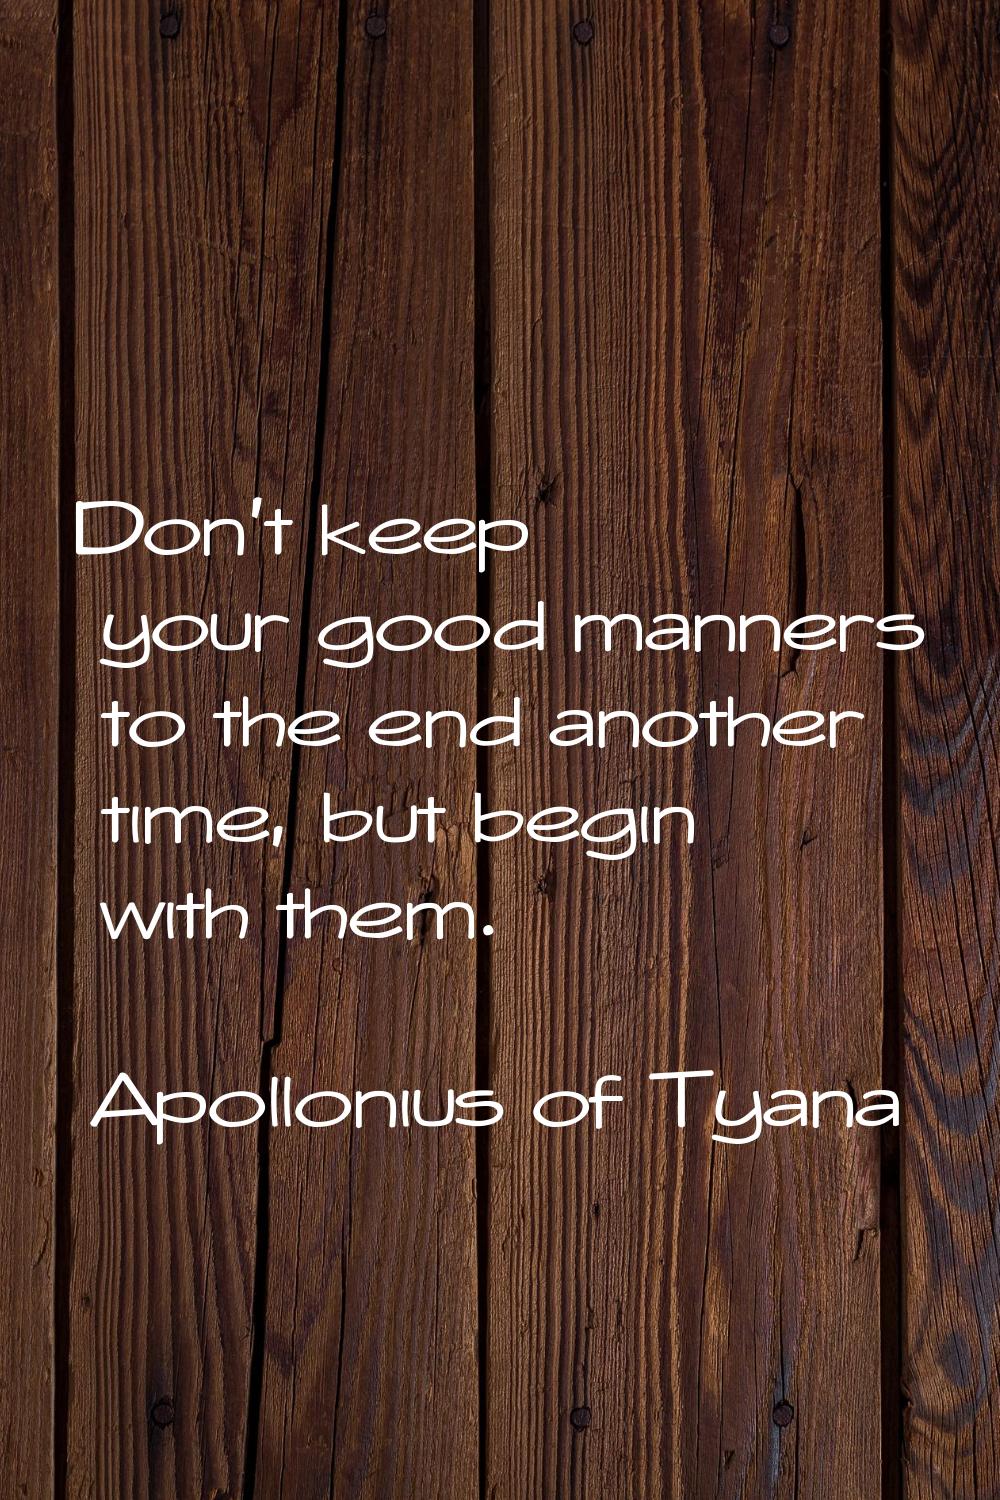 Don't keep your good manners to the end another time, but begin with them.